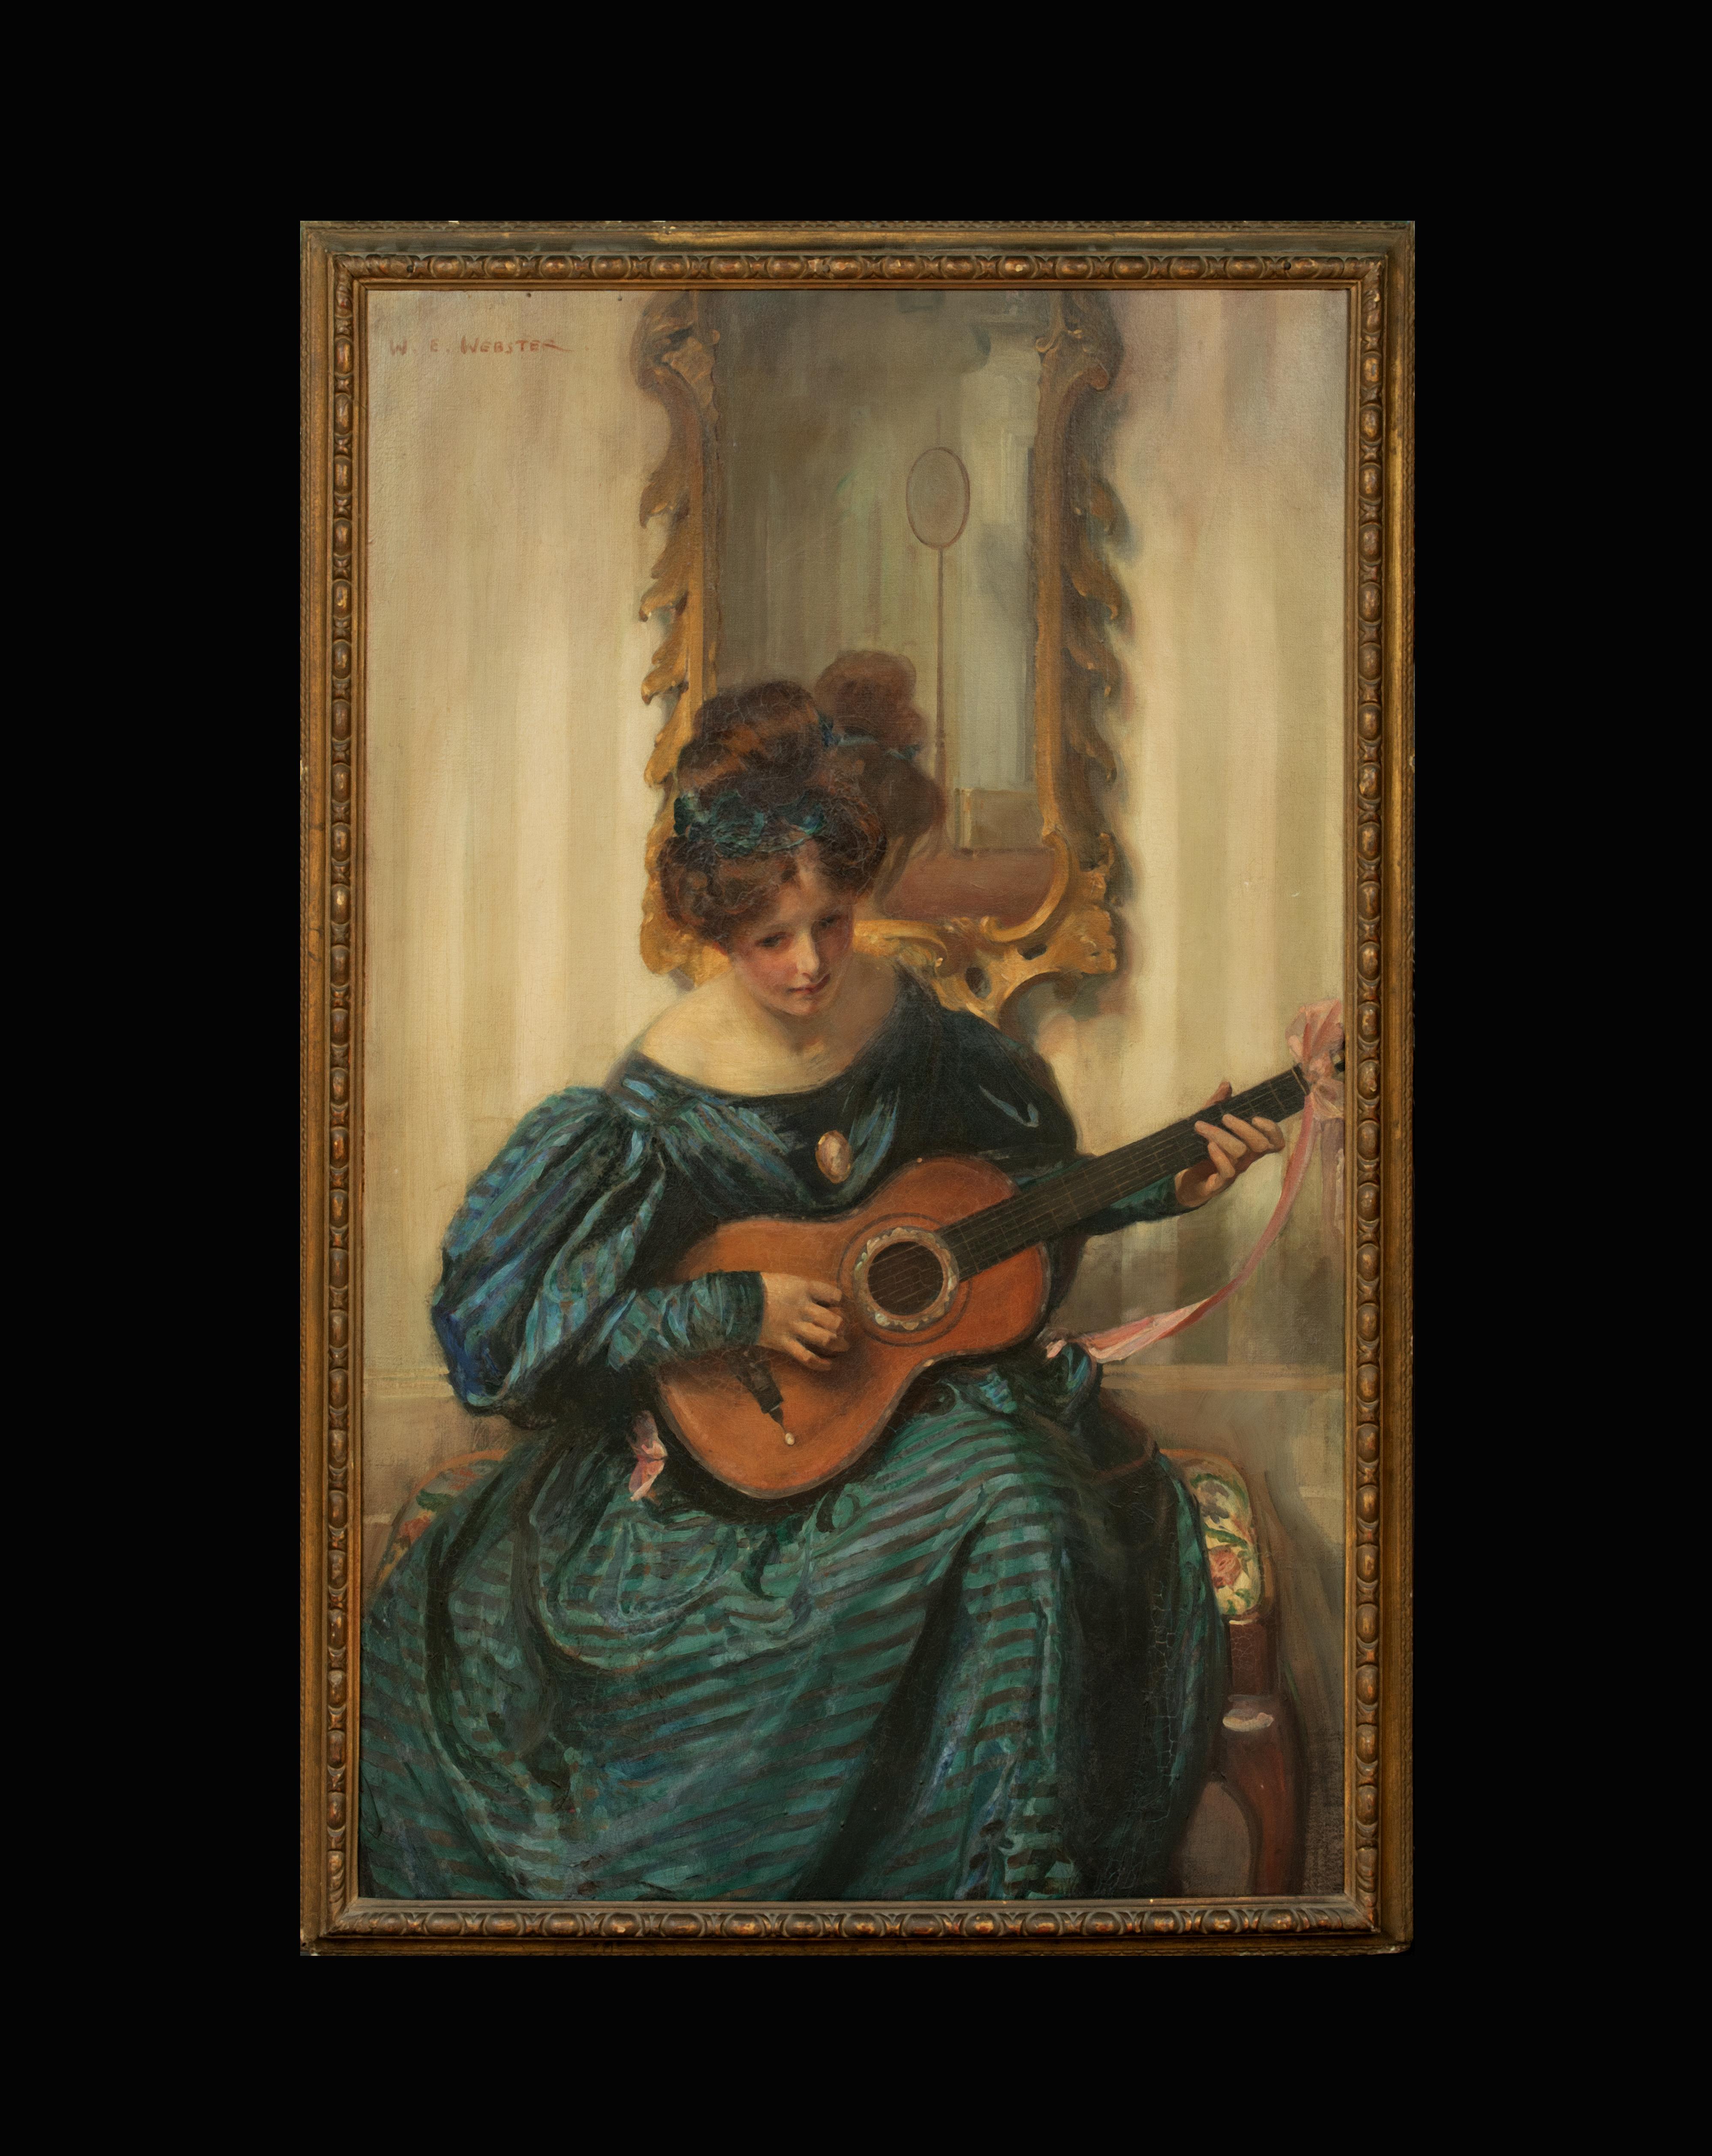 Portrait of a Lady Playing The Guitar, 19th Century   by WALTER ERNEST WEBSTER  - Painting by Walter Ernest Webster